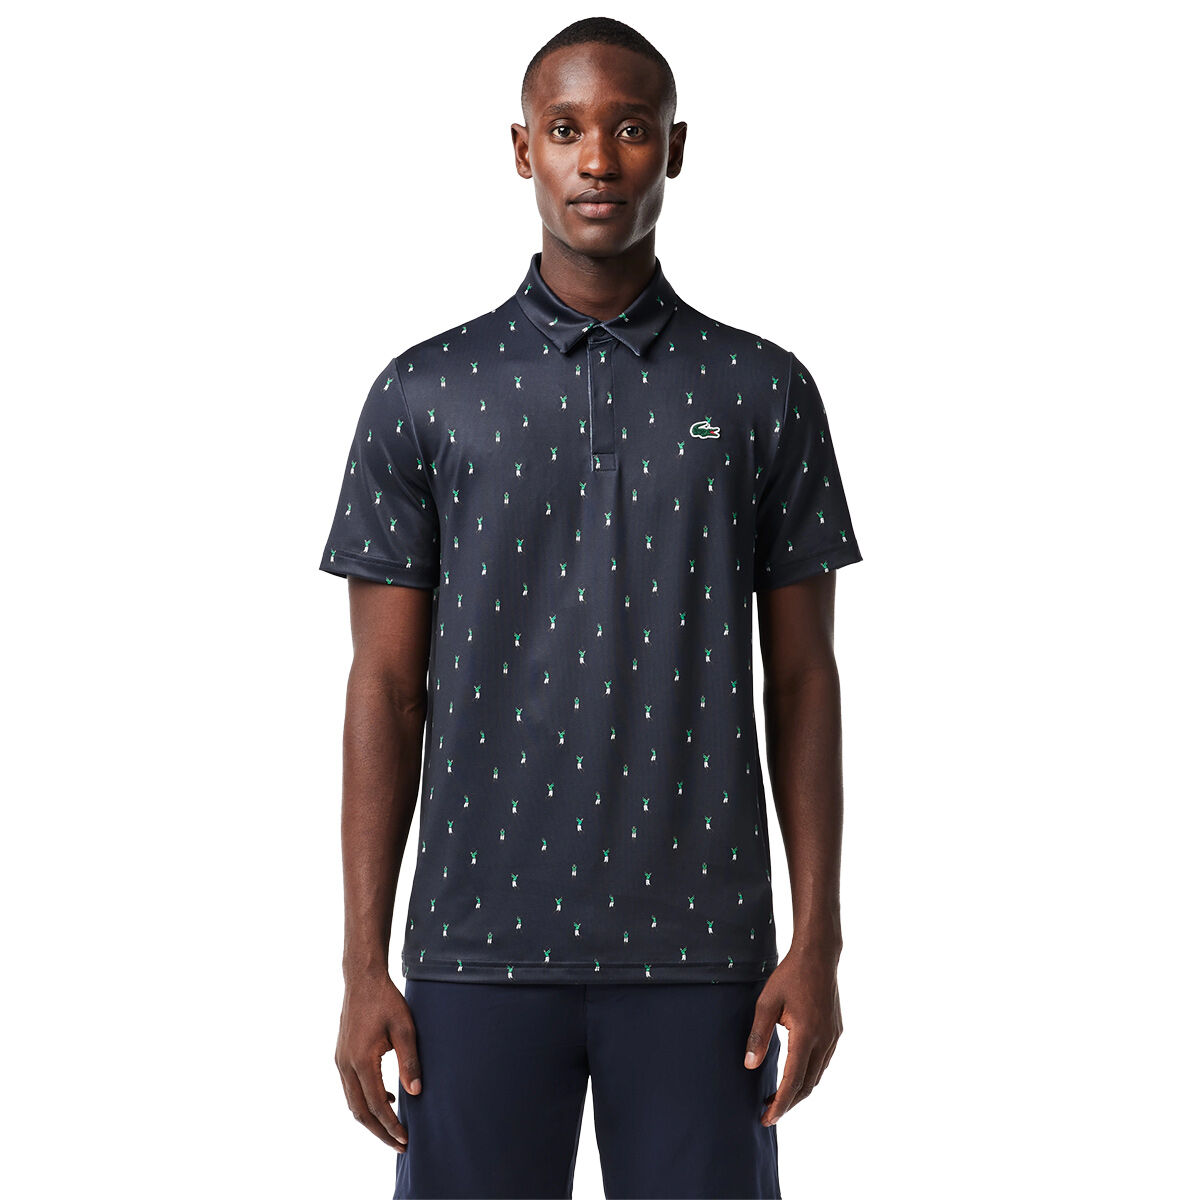 Lacoste Men's All-Over Print Golf Polo Shirt, Mens, Navy blue, Large | American Golf von Lacoste